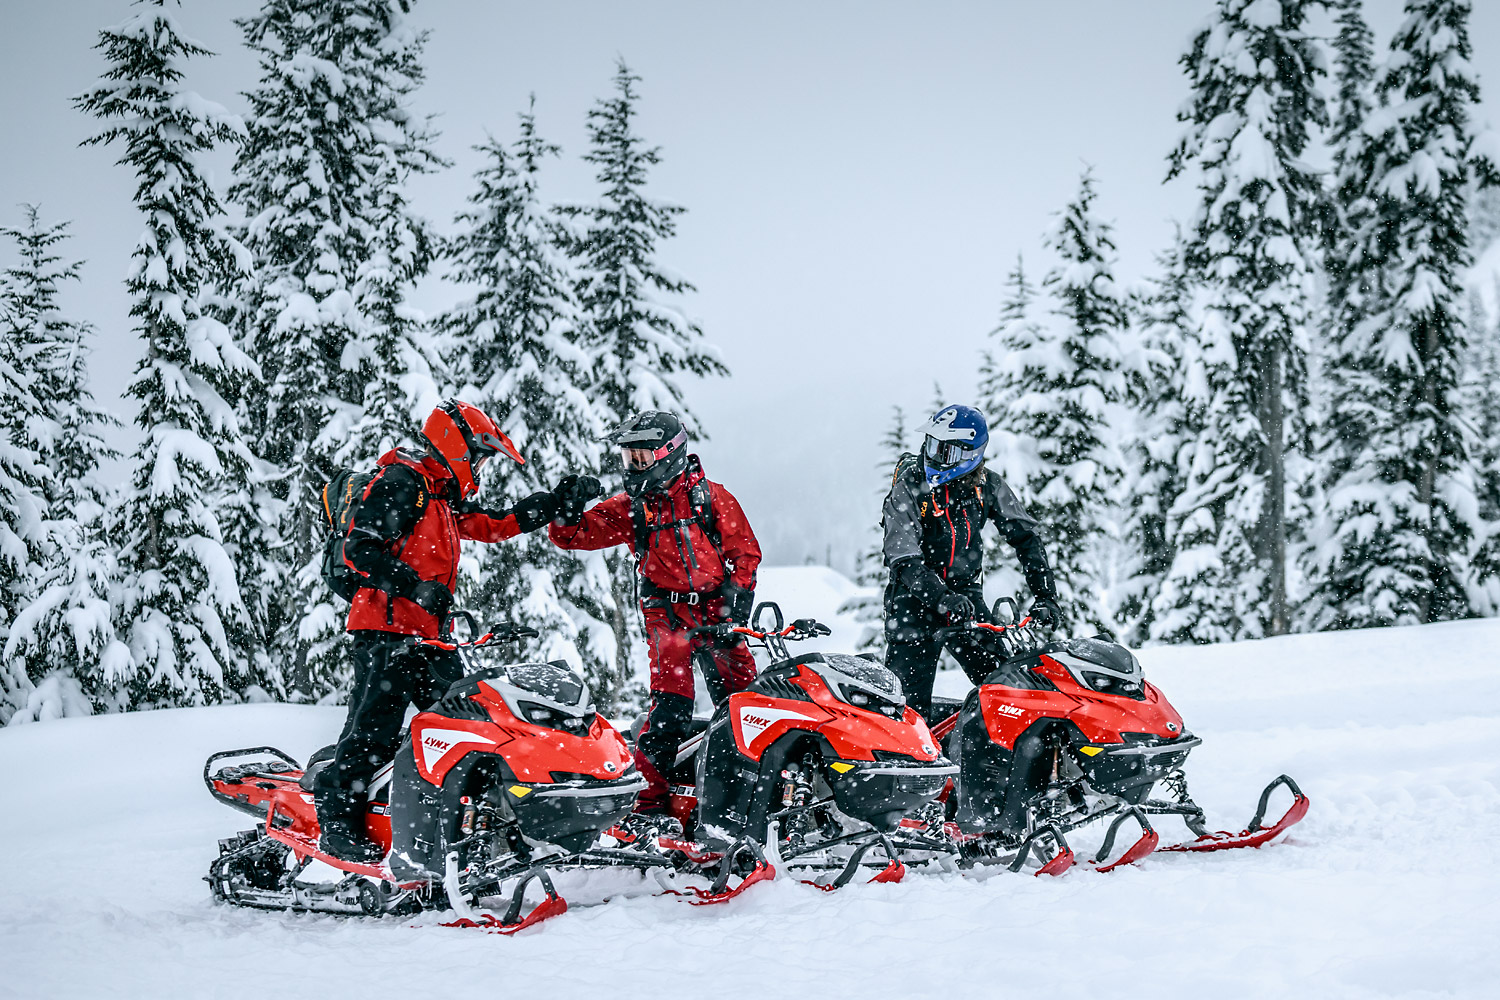 Introducing Yamaha Motor Europe's Snowmobile Line-up for 2023